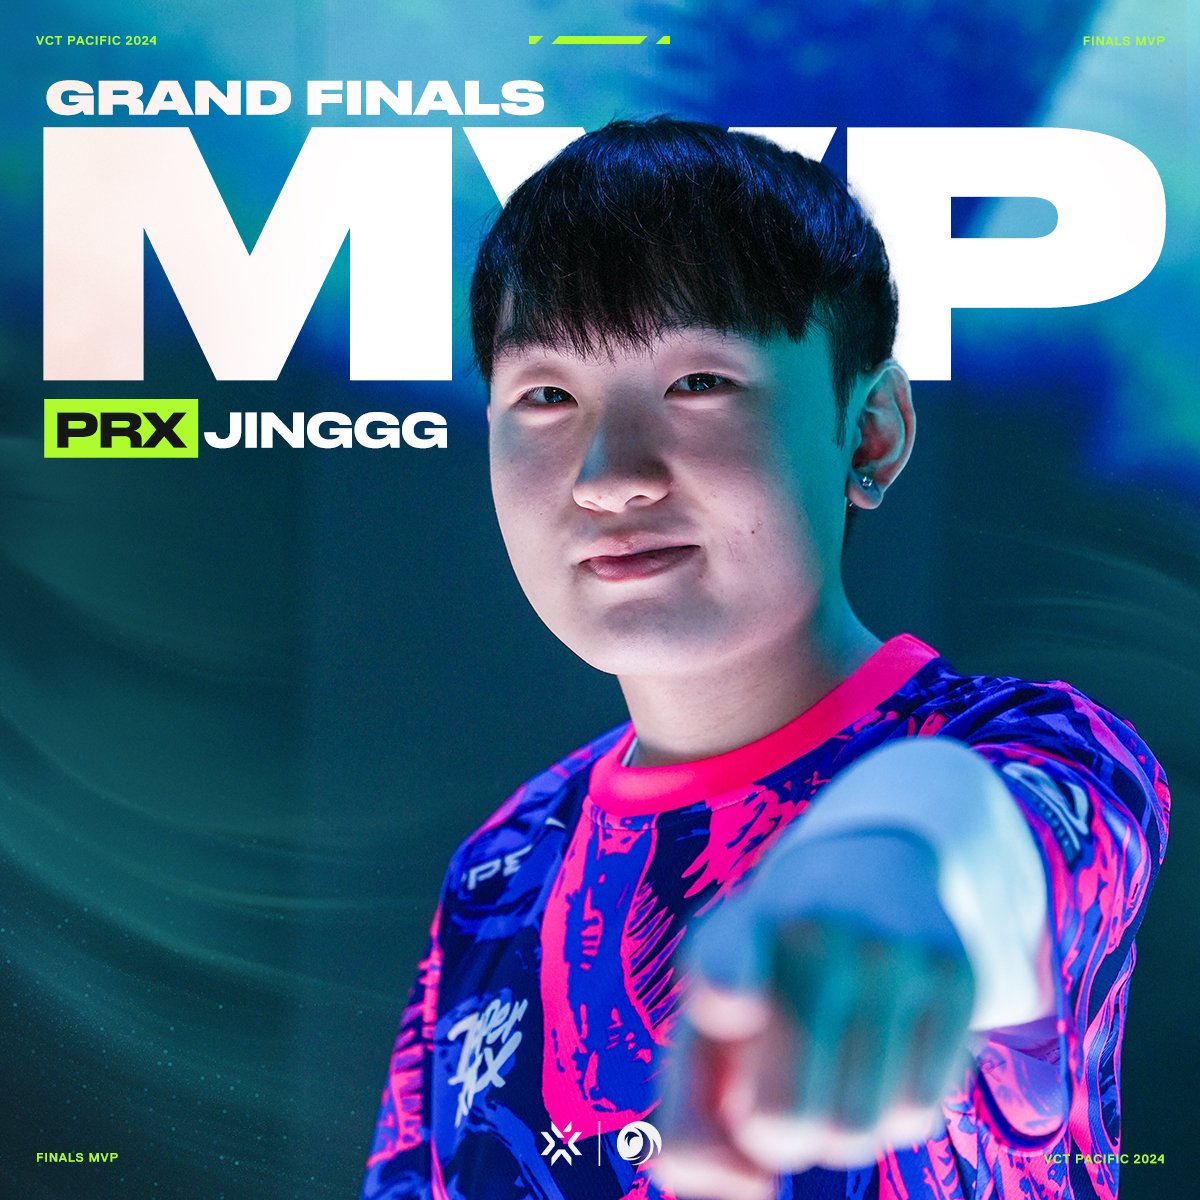 He came back and took over as the undeniable Grand Finals MVP 🐐

@Jingggxd will always be one of the greats of #VCTPacific